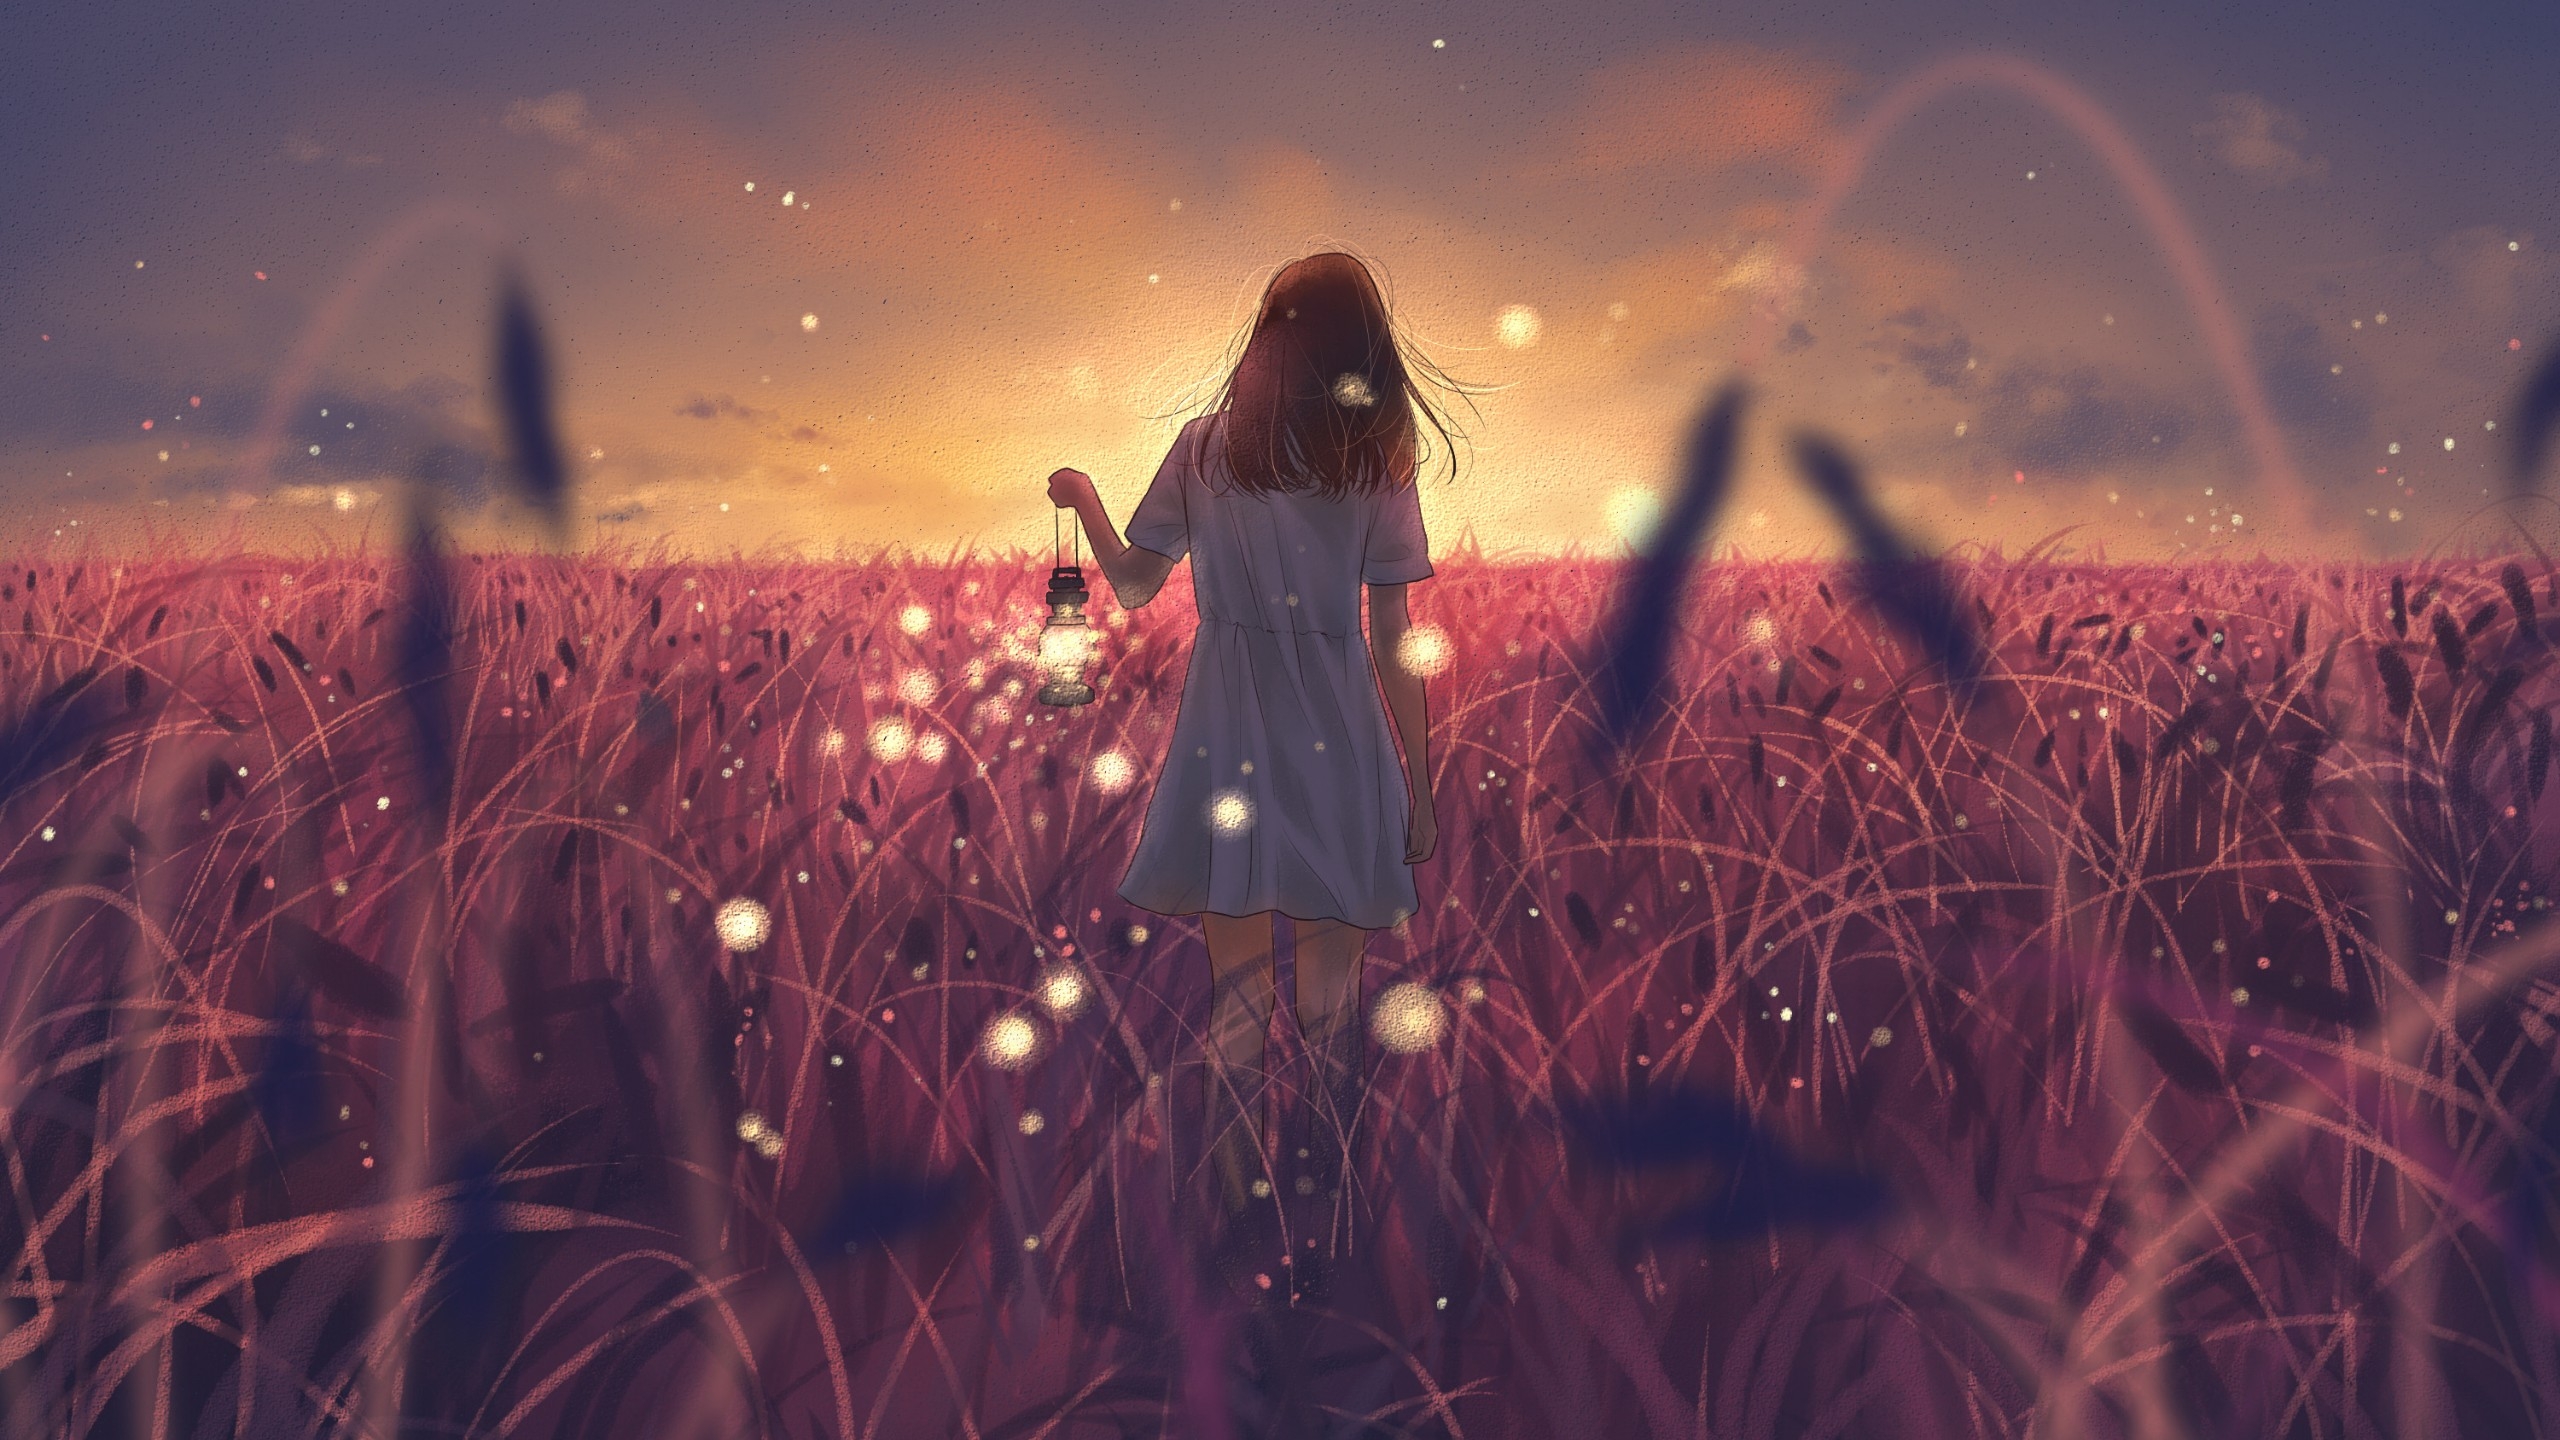 Anime Girl In Field Wallpapers